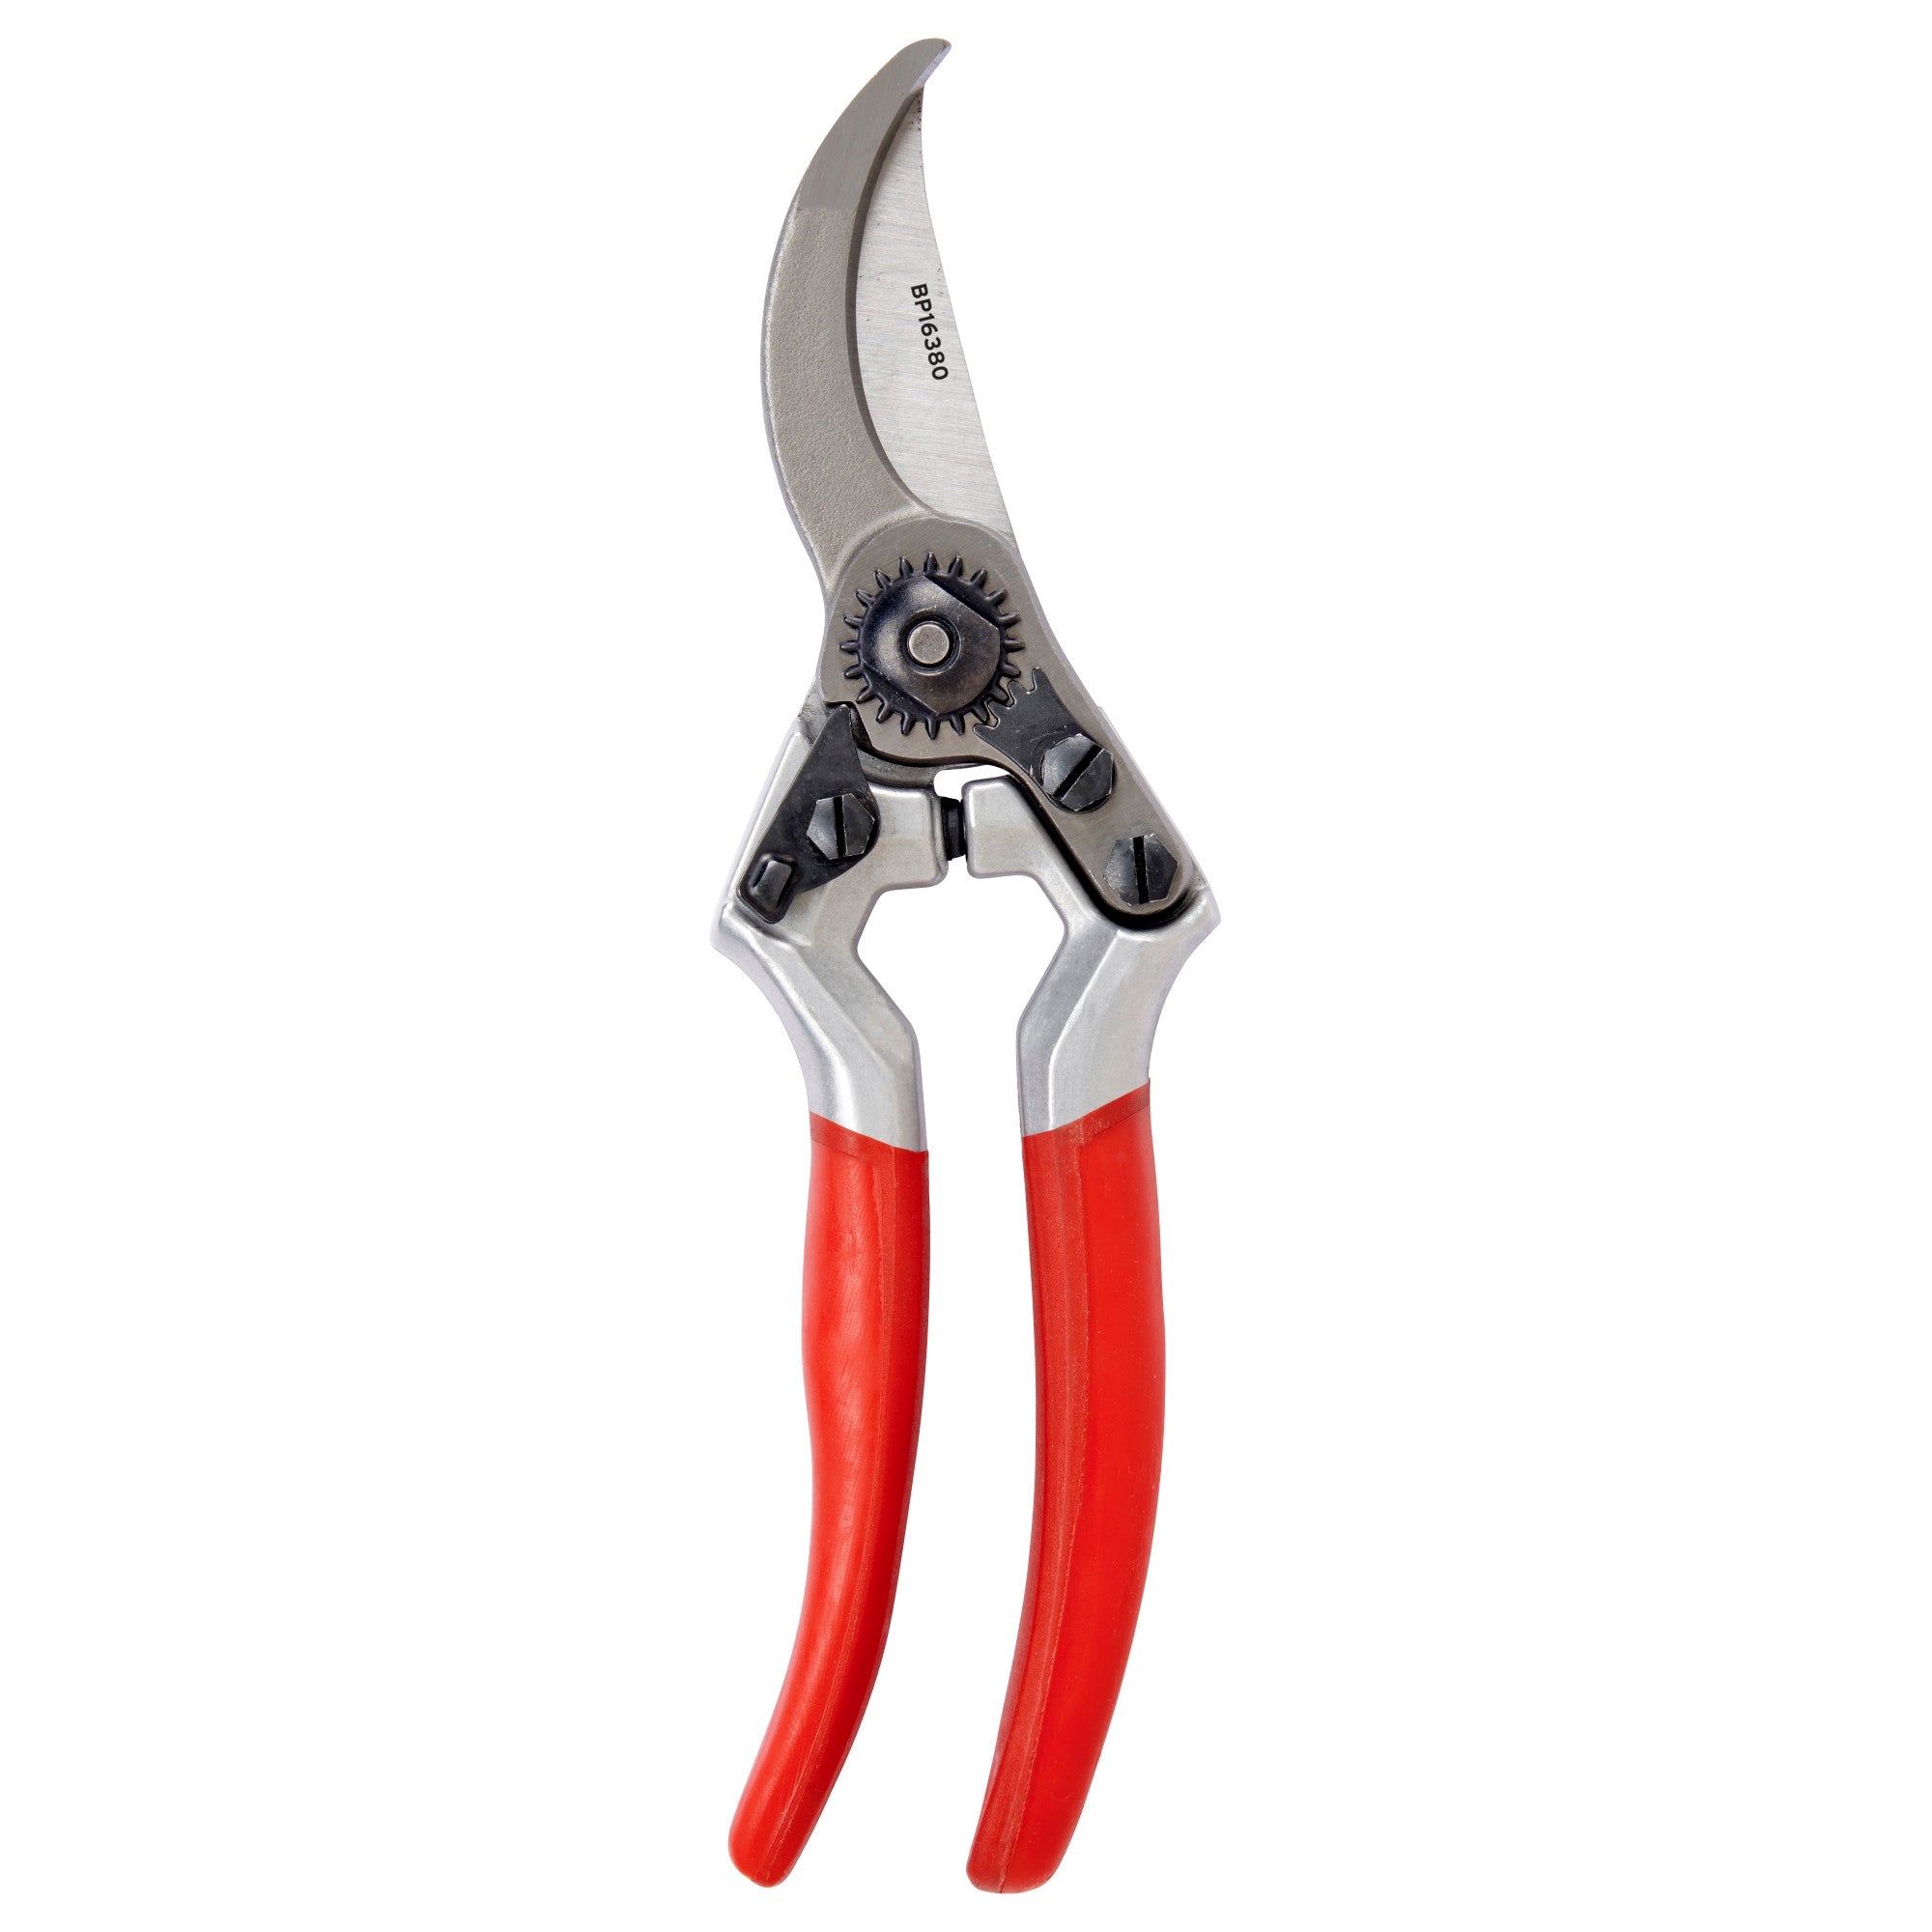 XSeries Pro Bypass Pruner, 1 in. Cut Capacity